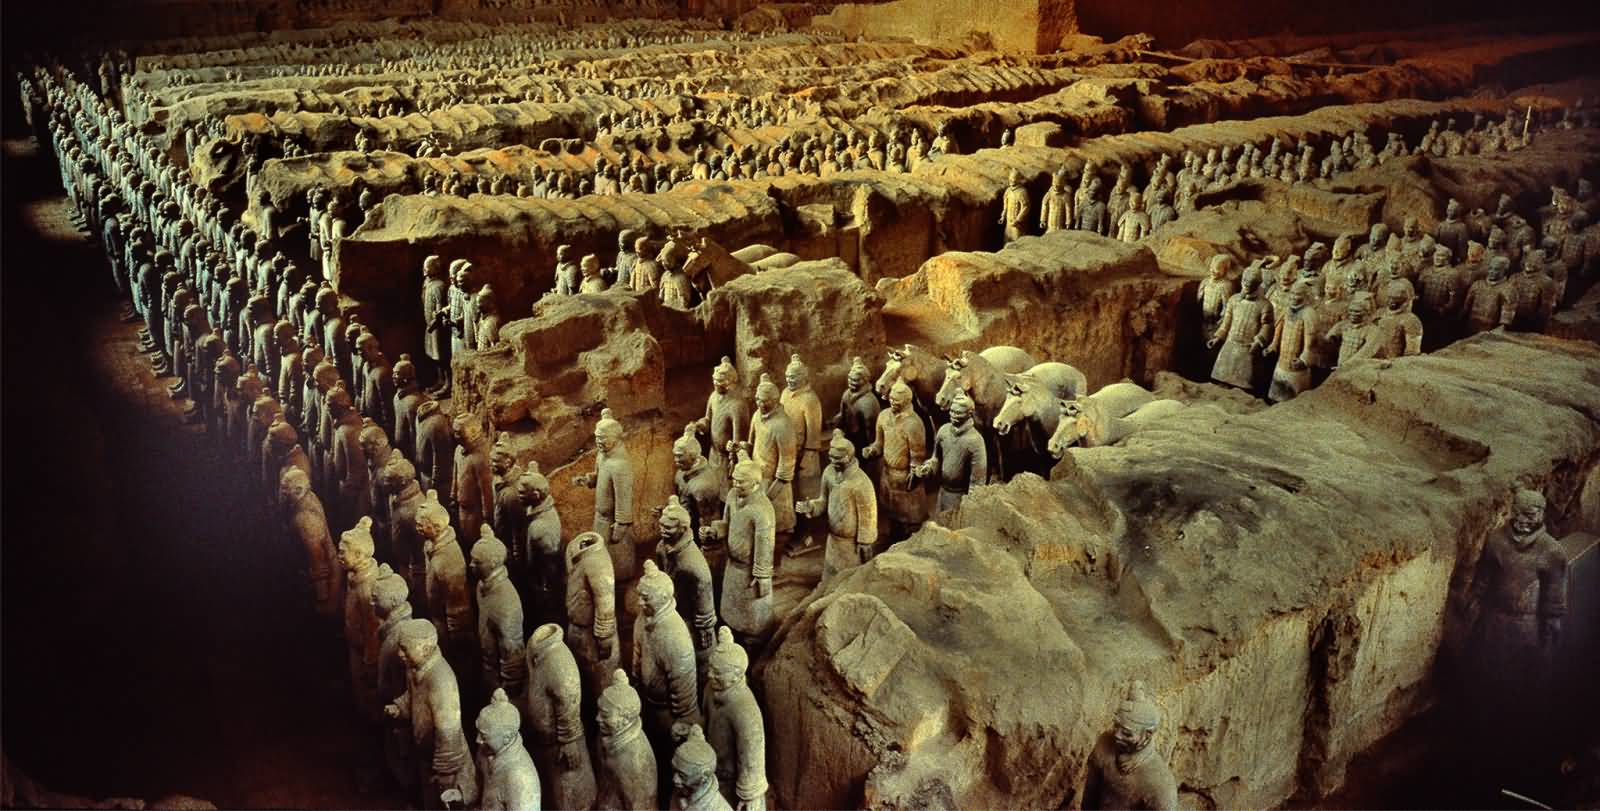 Side View Of The Terracotta Army